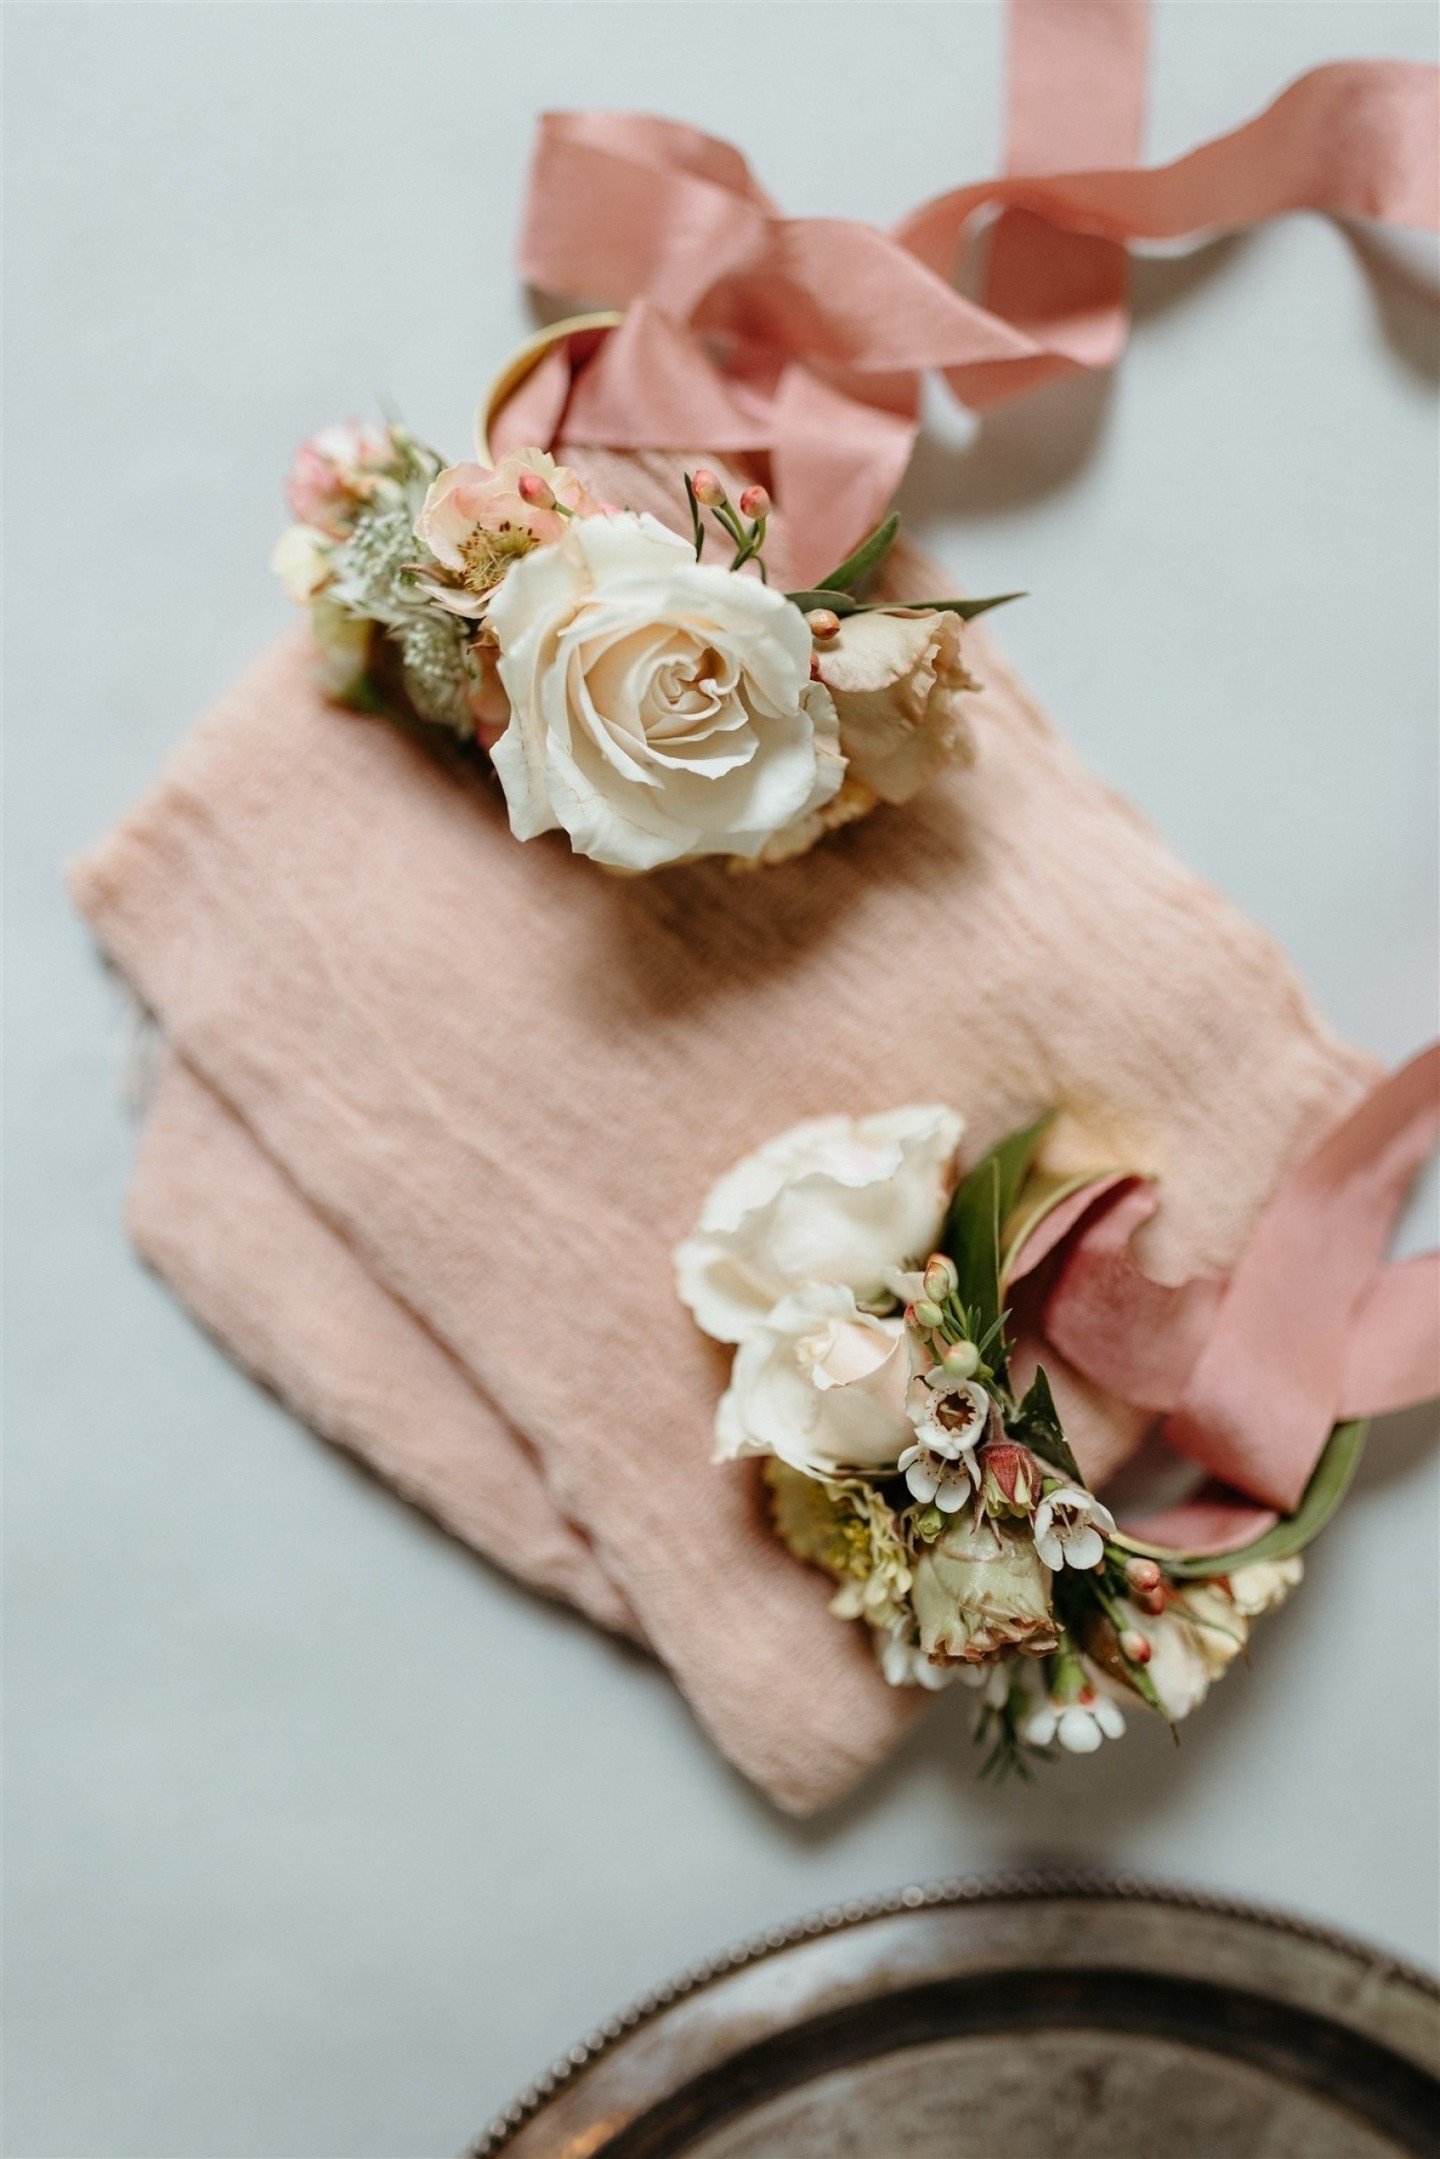 Enjoying Mother&rsquo;s Day Weekend 🤍💕💗💖🤍

Wristlets made with love with botanically dyed silk ribbon from @silkandwillow 

📸 @afteritallphoto
Planner @monicarelyeaevents
Venue @glynwoodevents 
Designer @meadowwilds 
Caterer @maincoursecatering